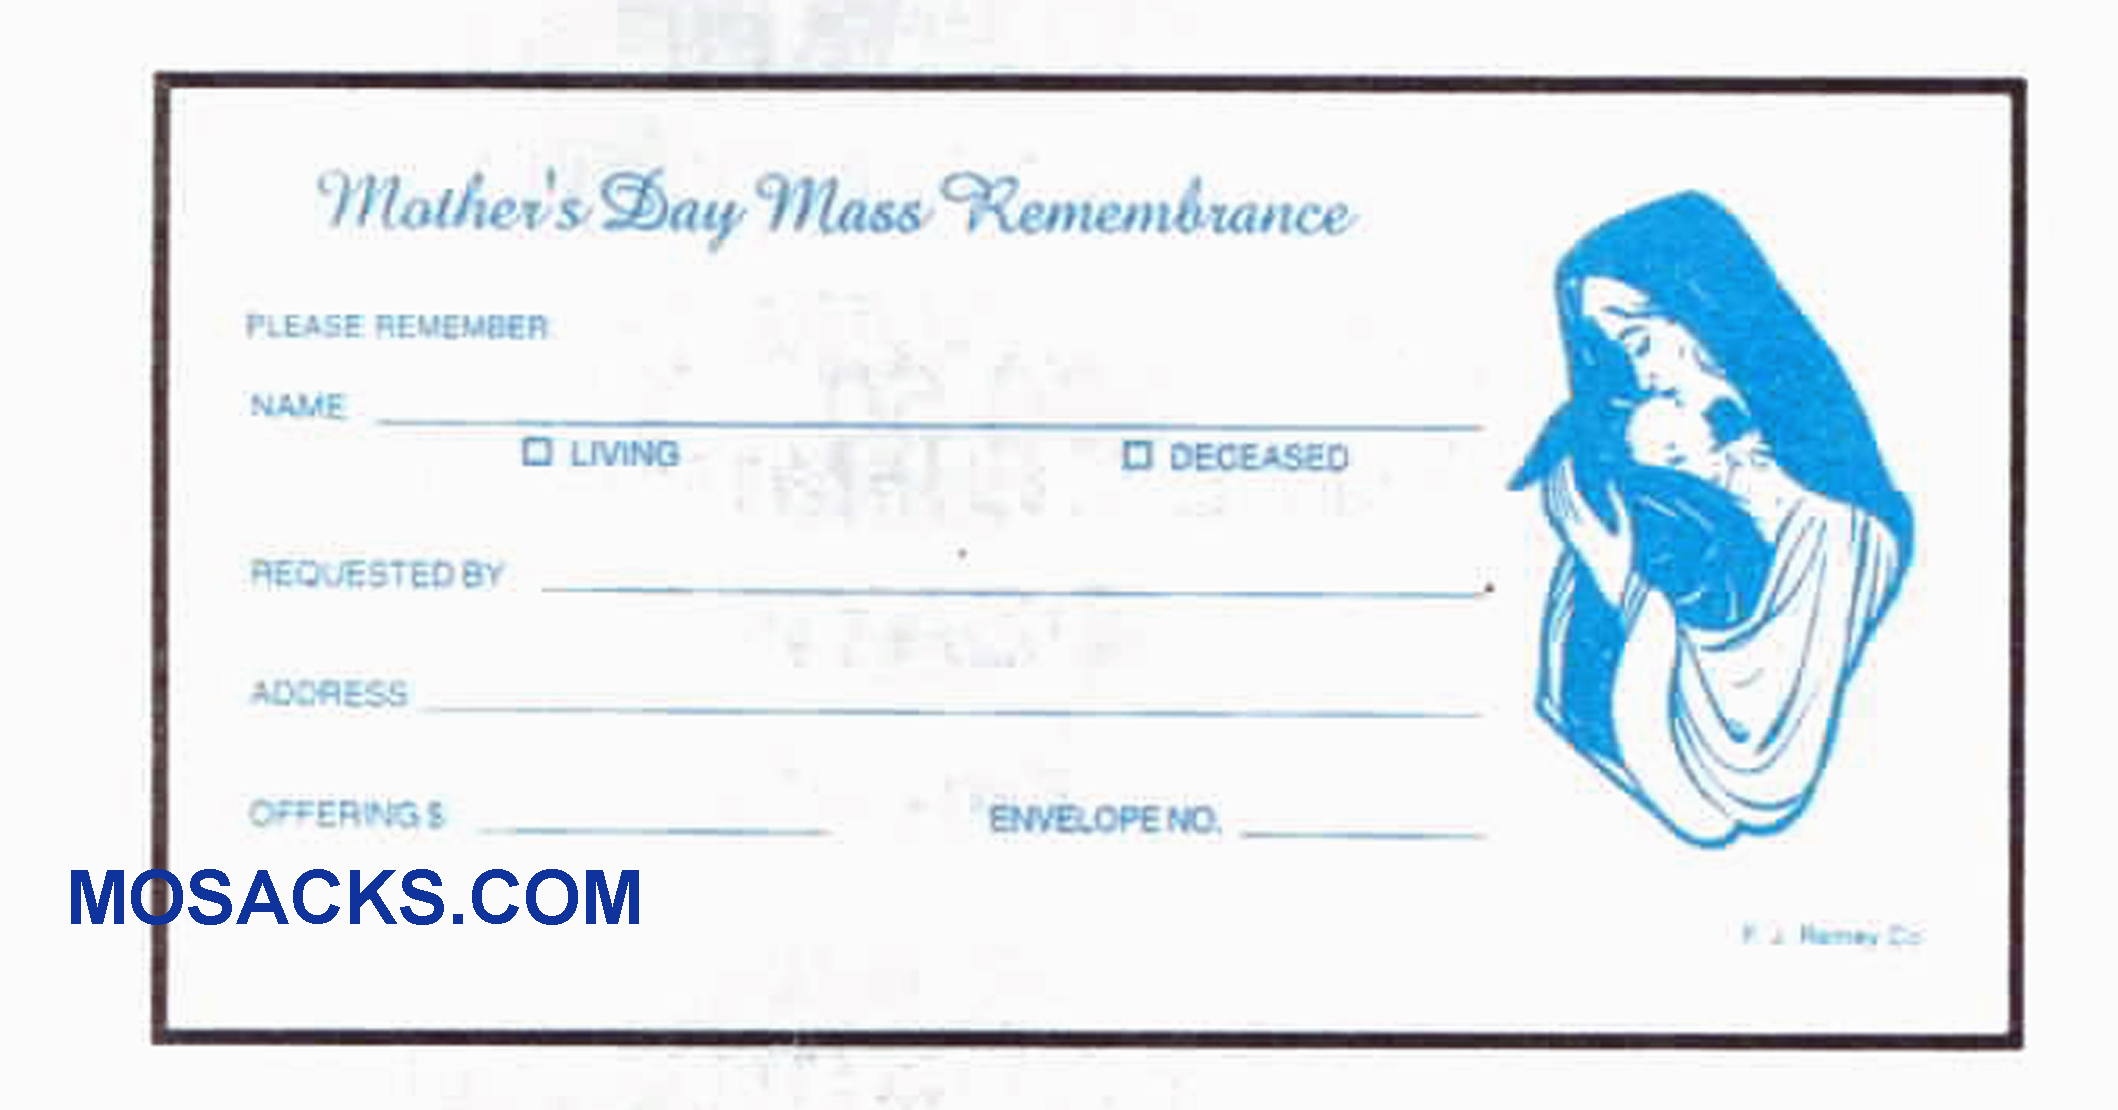 Mother's Day Mass Remembrance Envelope 6-1/4 x 3-1/8 #304-369